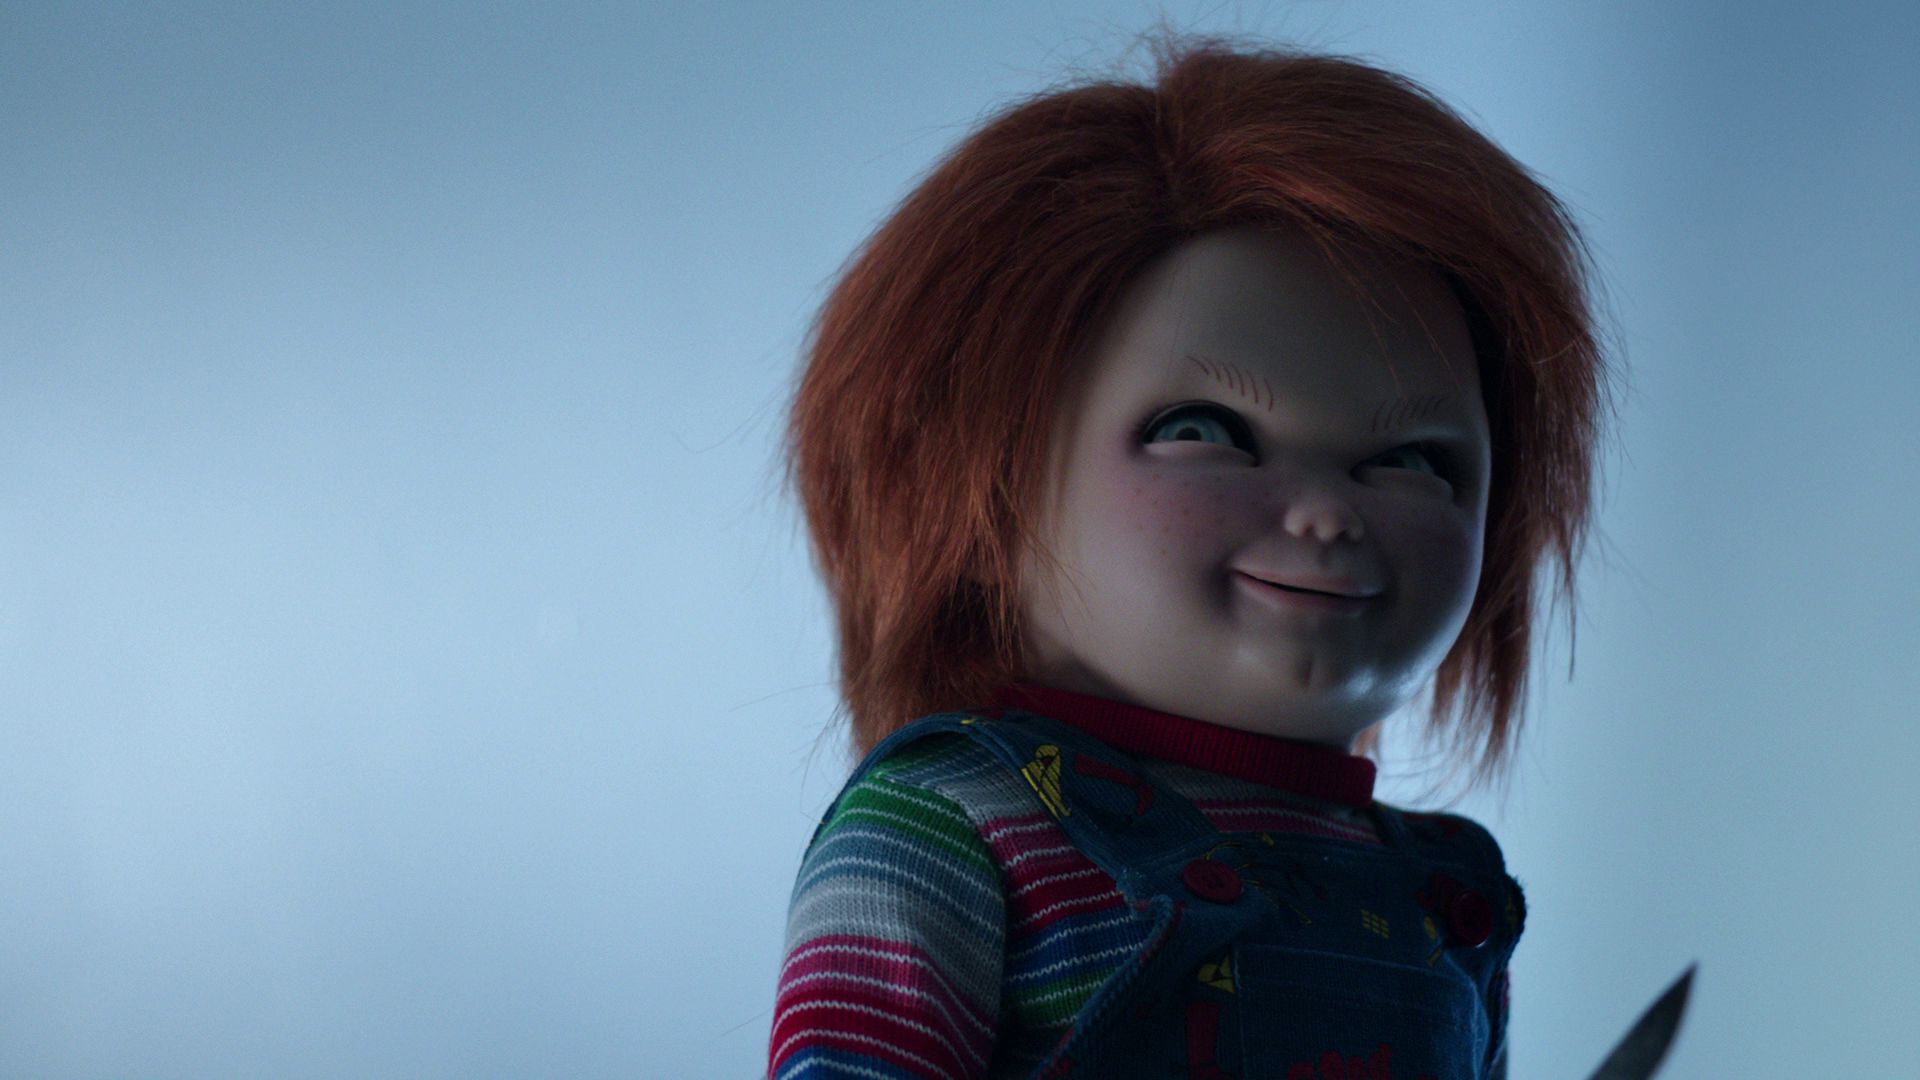 Chucky Doll Download Free Wallpapers For Pc In Hd - Cult Of Chucky 2017 - HD Wallpaper 